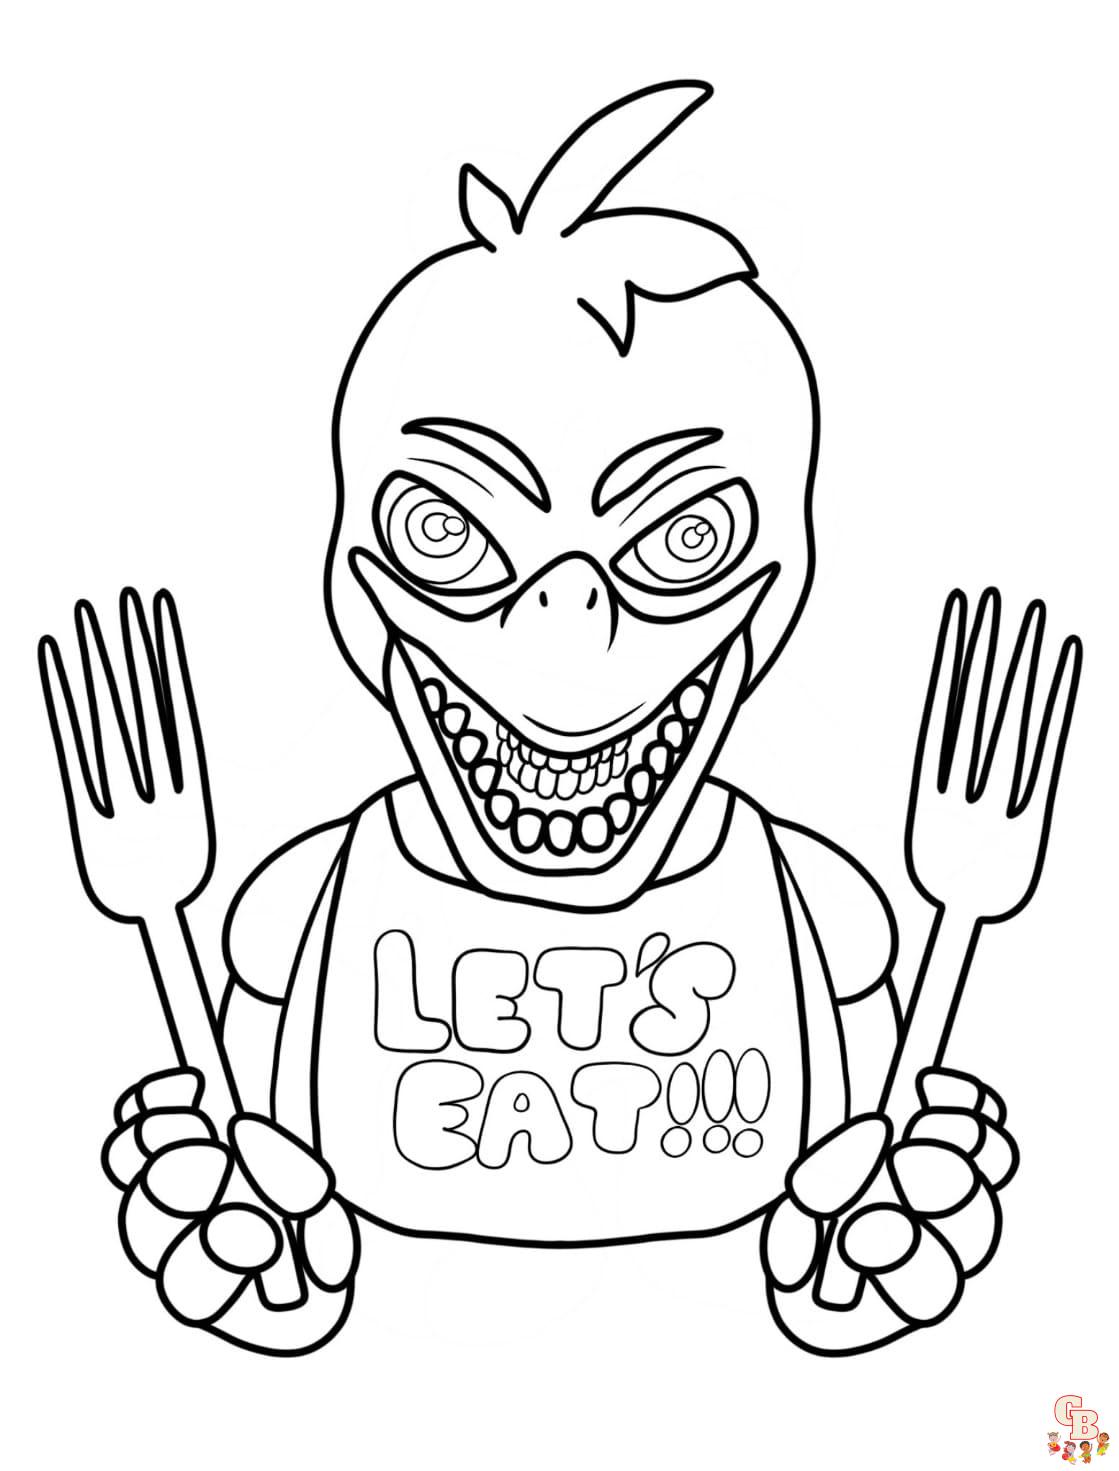 Free Chica coloring pages for kids